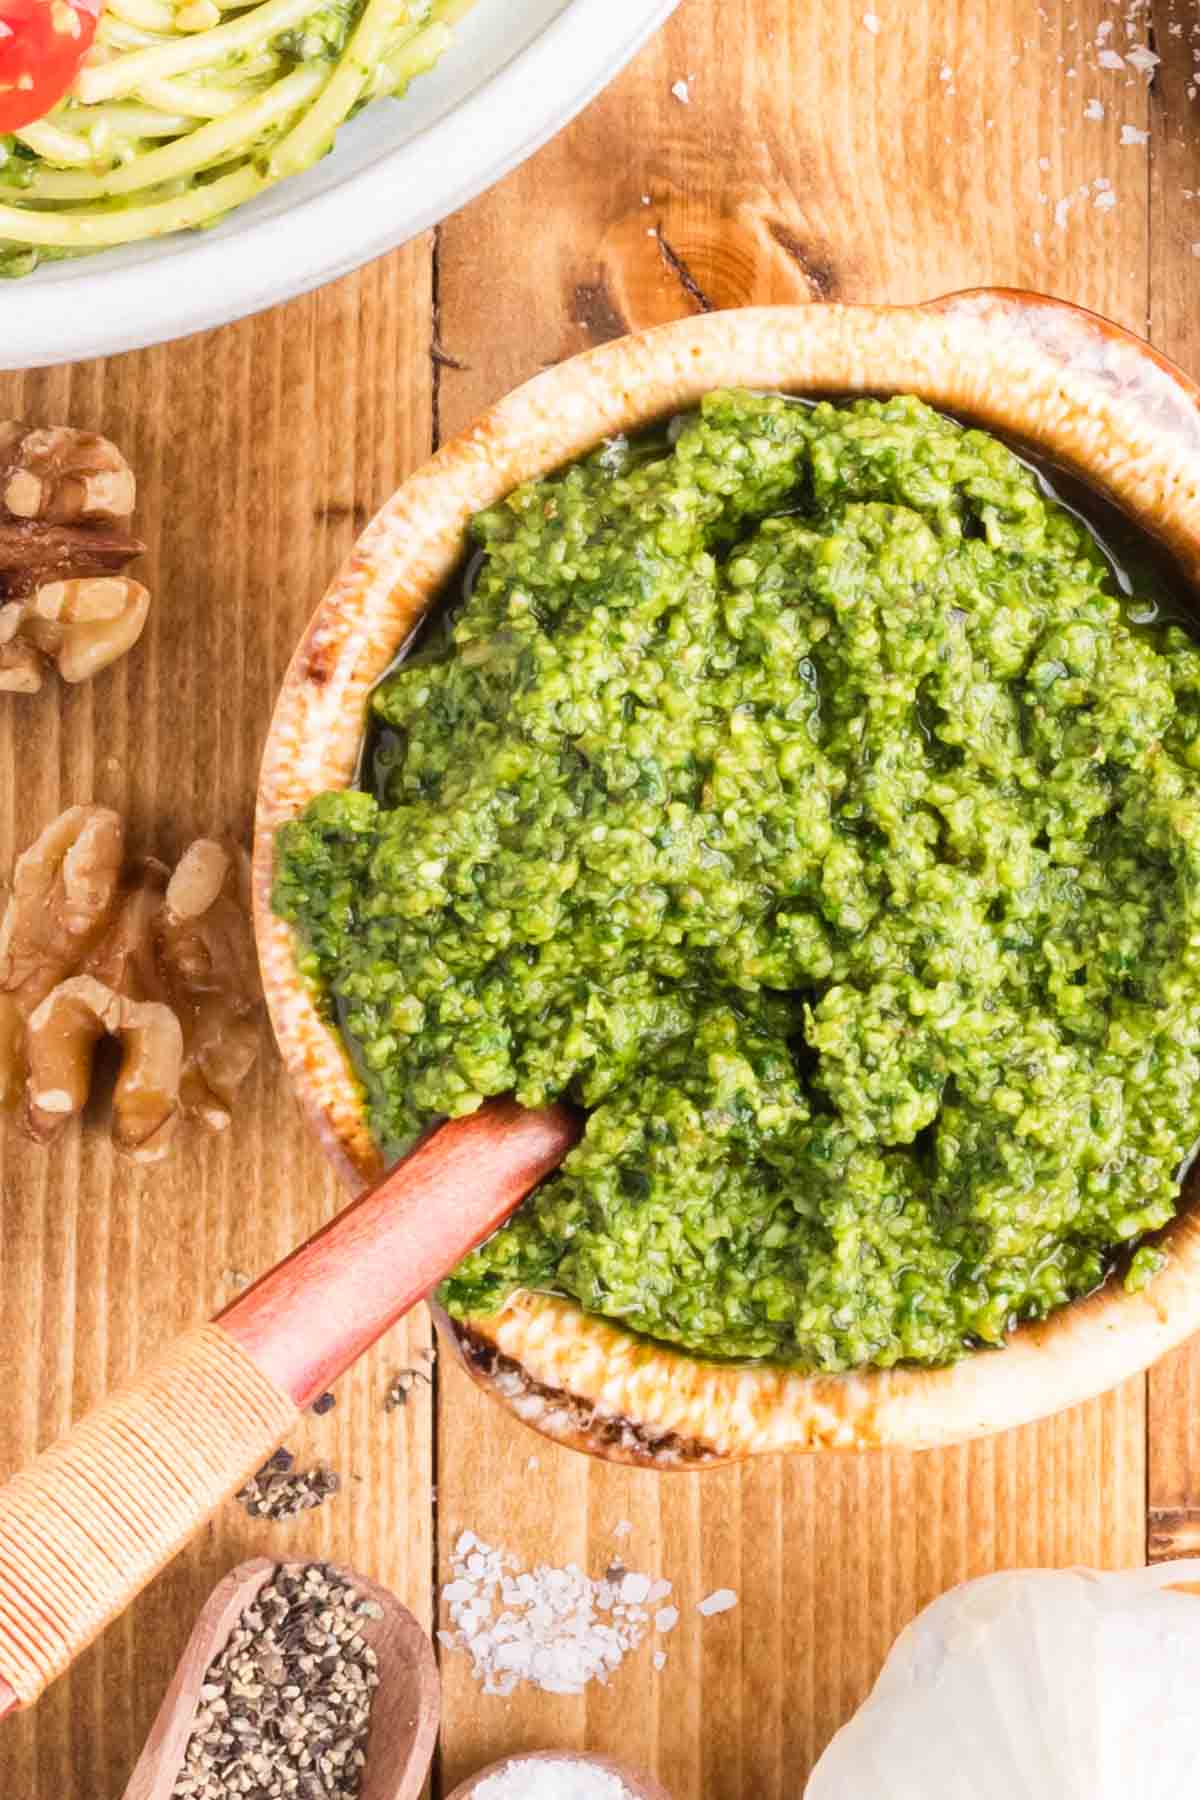 Blassic basil pesto in a bowl with a wooden spoon set on a wooden table.